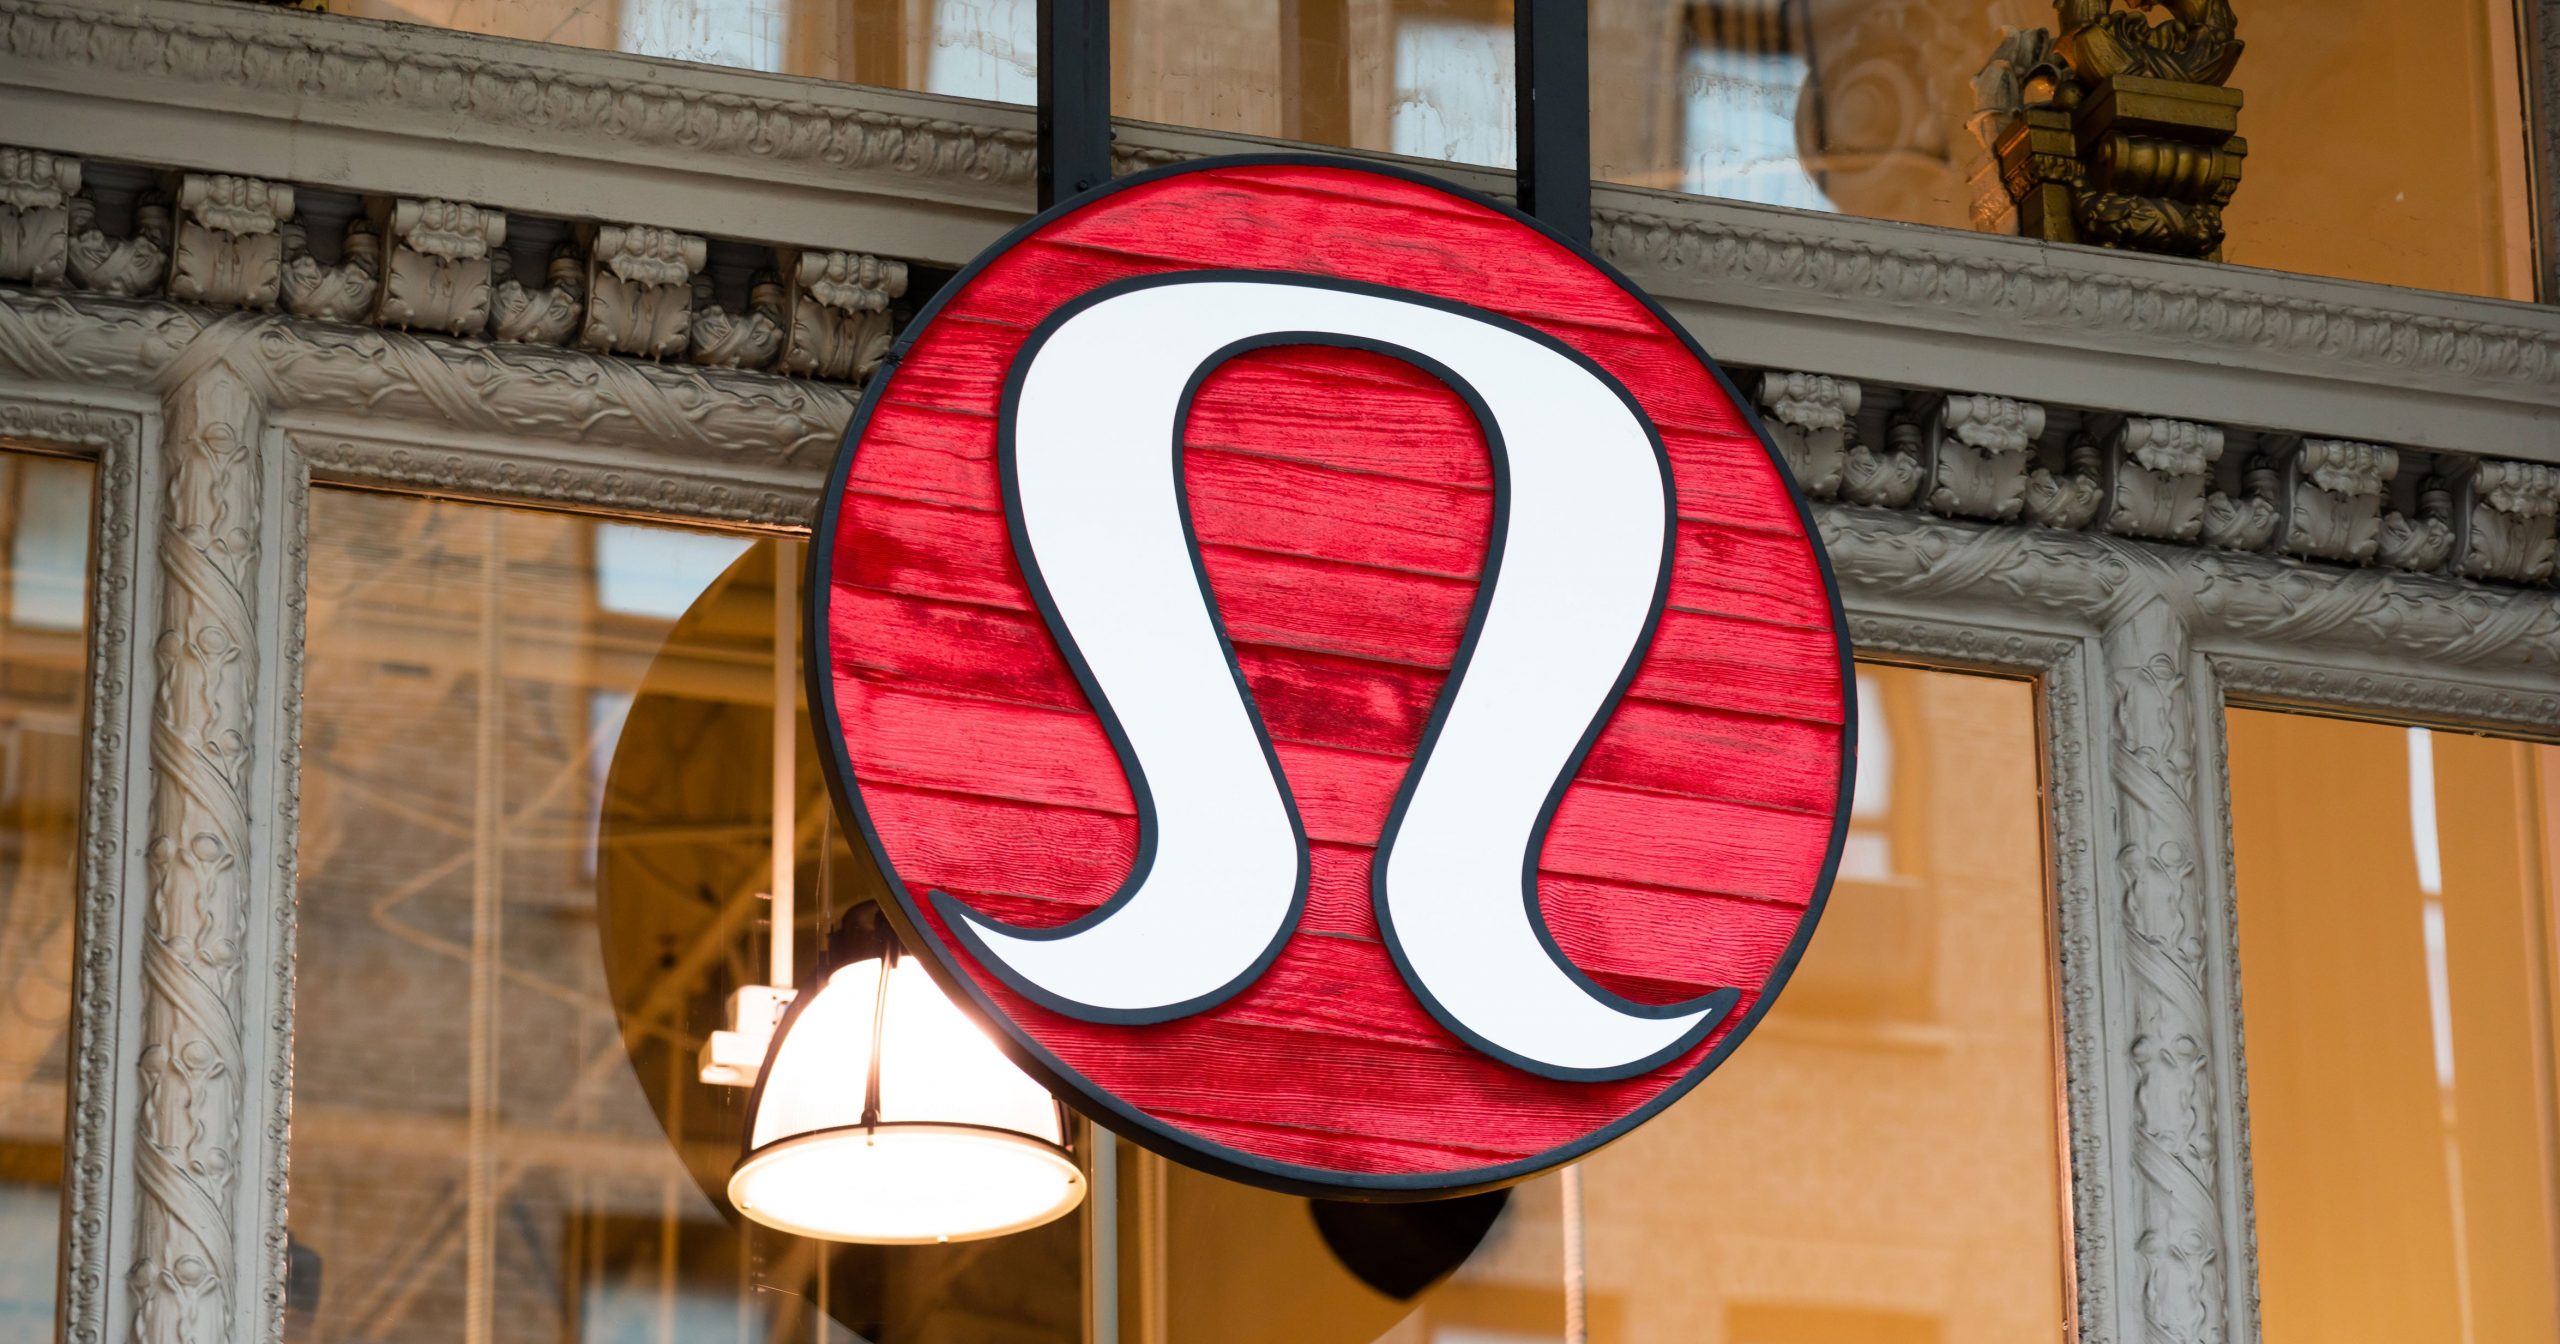 Lululemon Fires Employee Over Racist Shirt Controversy